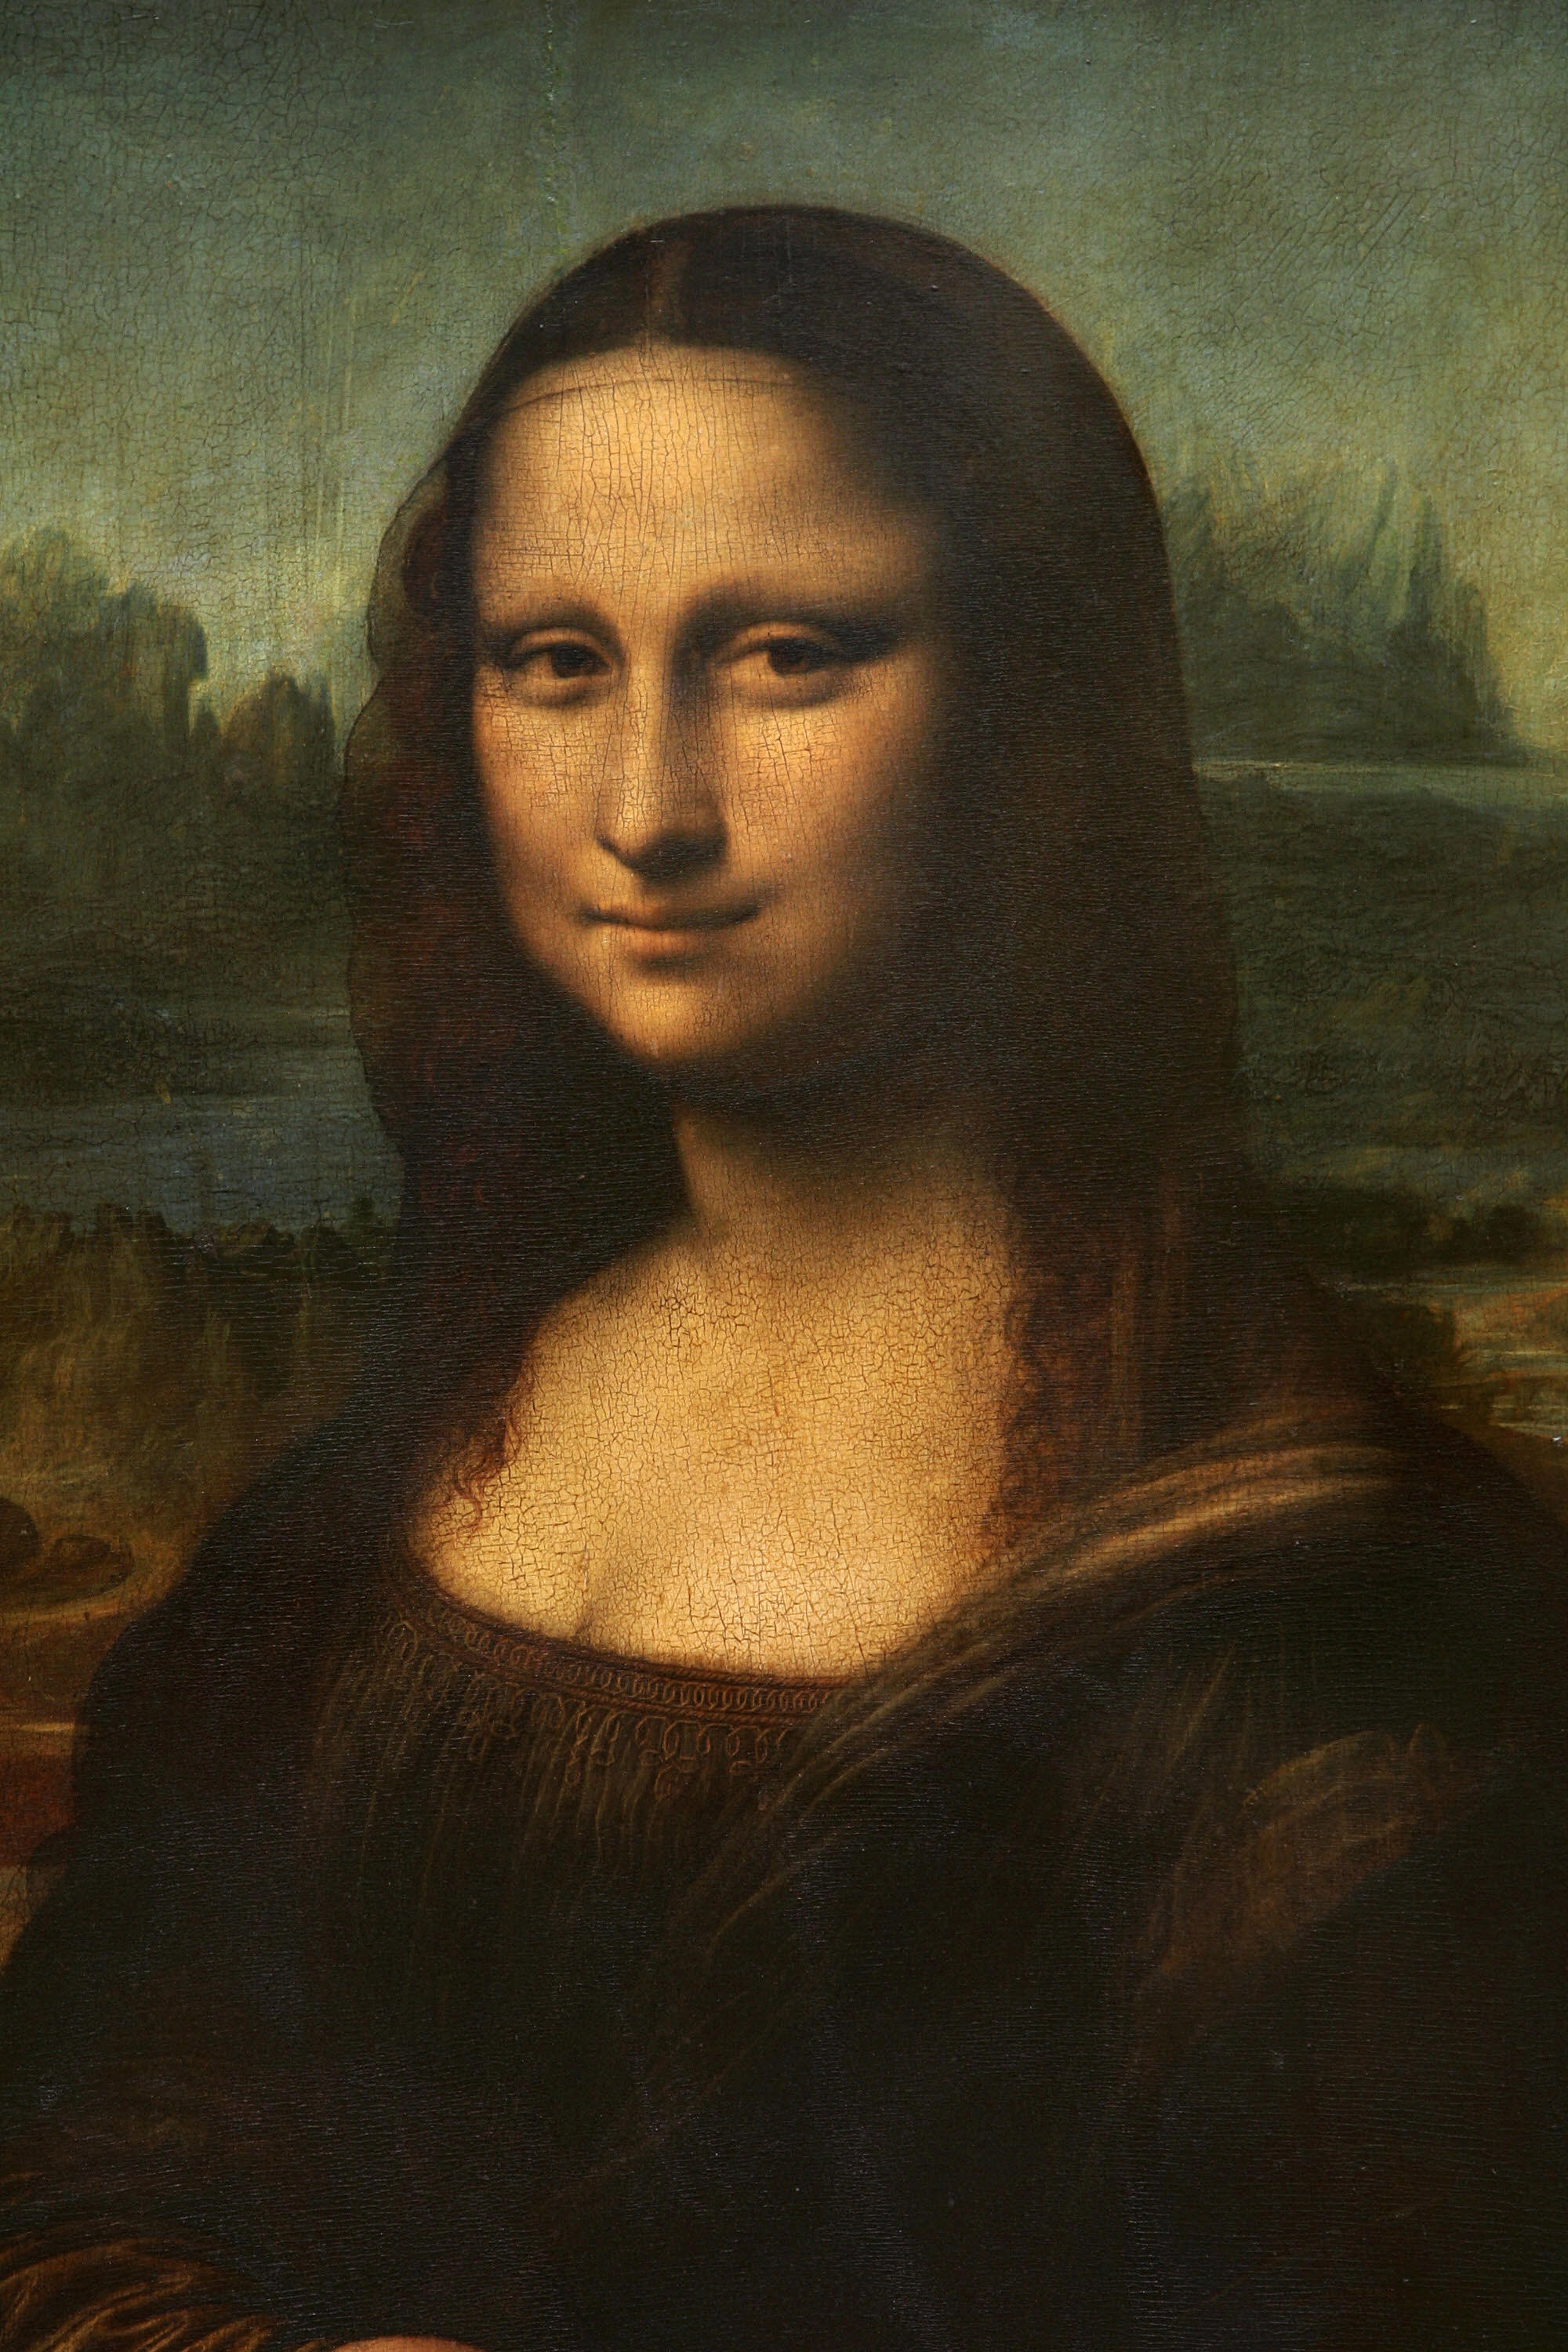 Mona Lisa's eyes don't actually follow you, researchers say - CNN Style